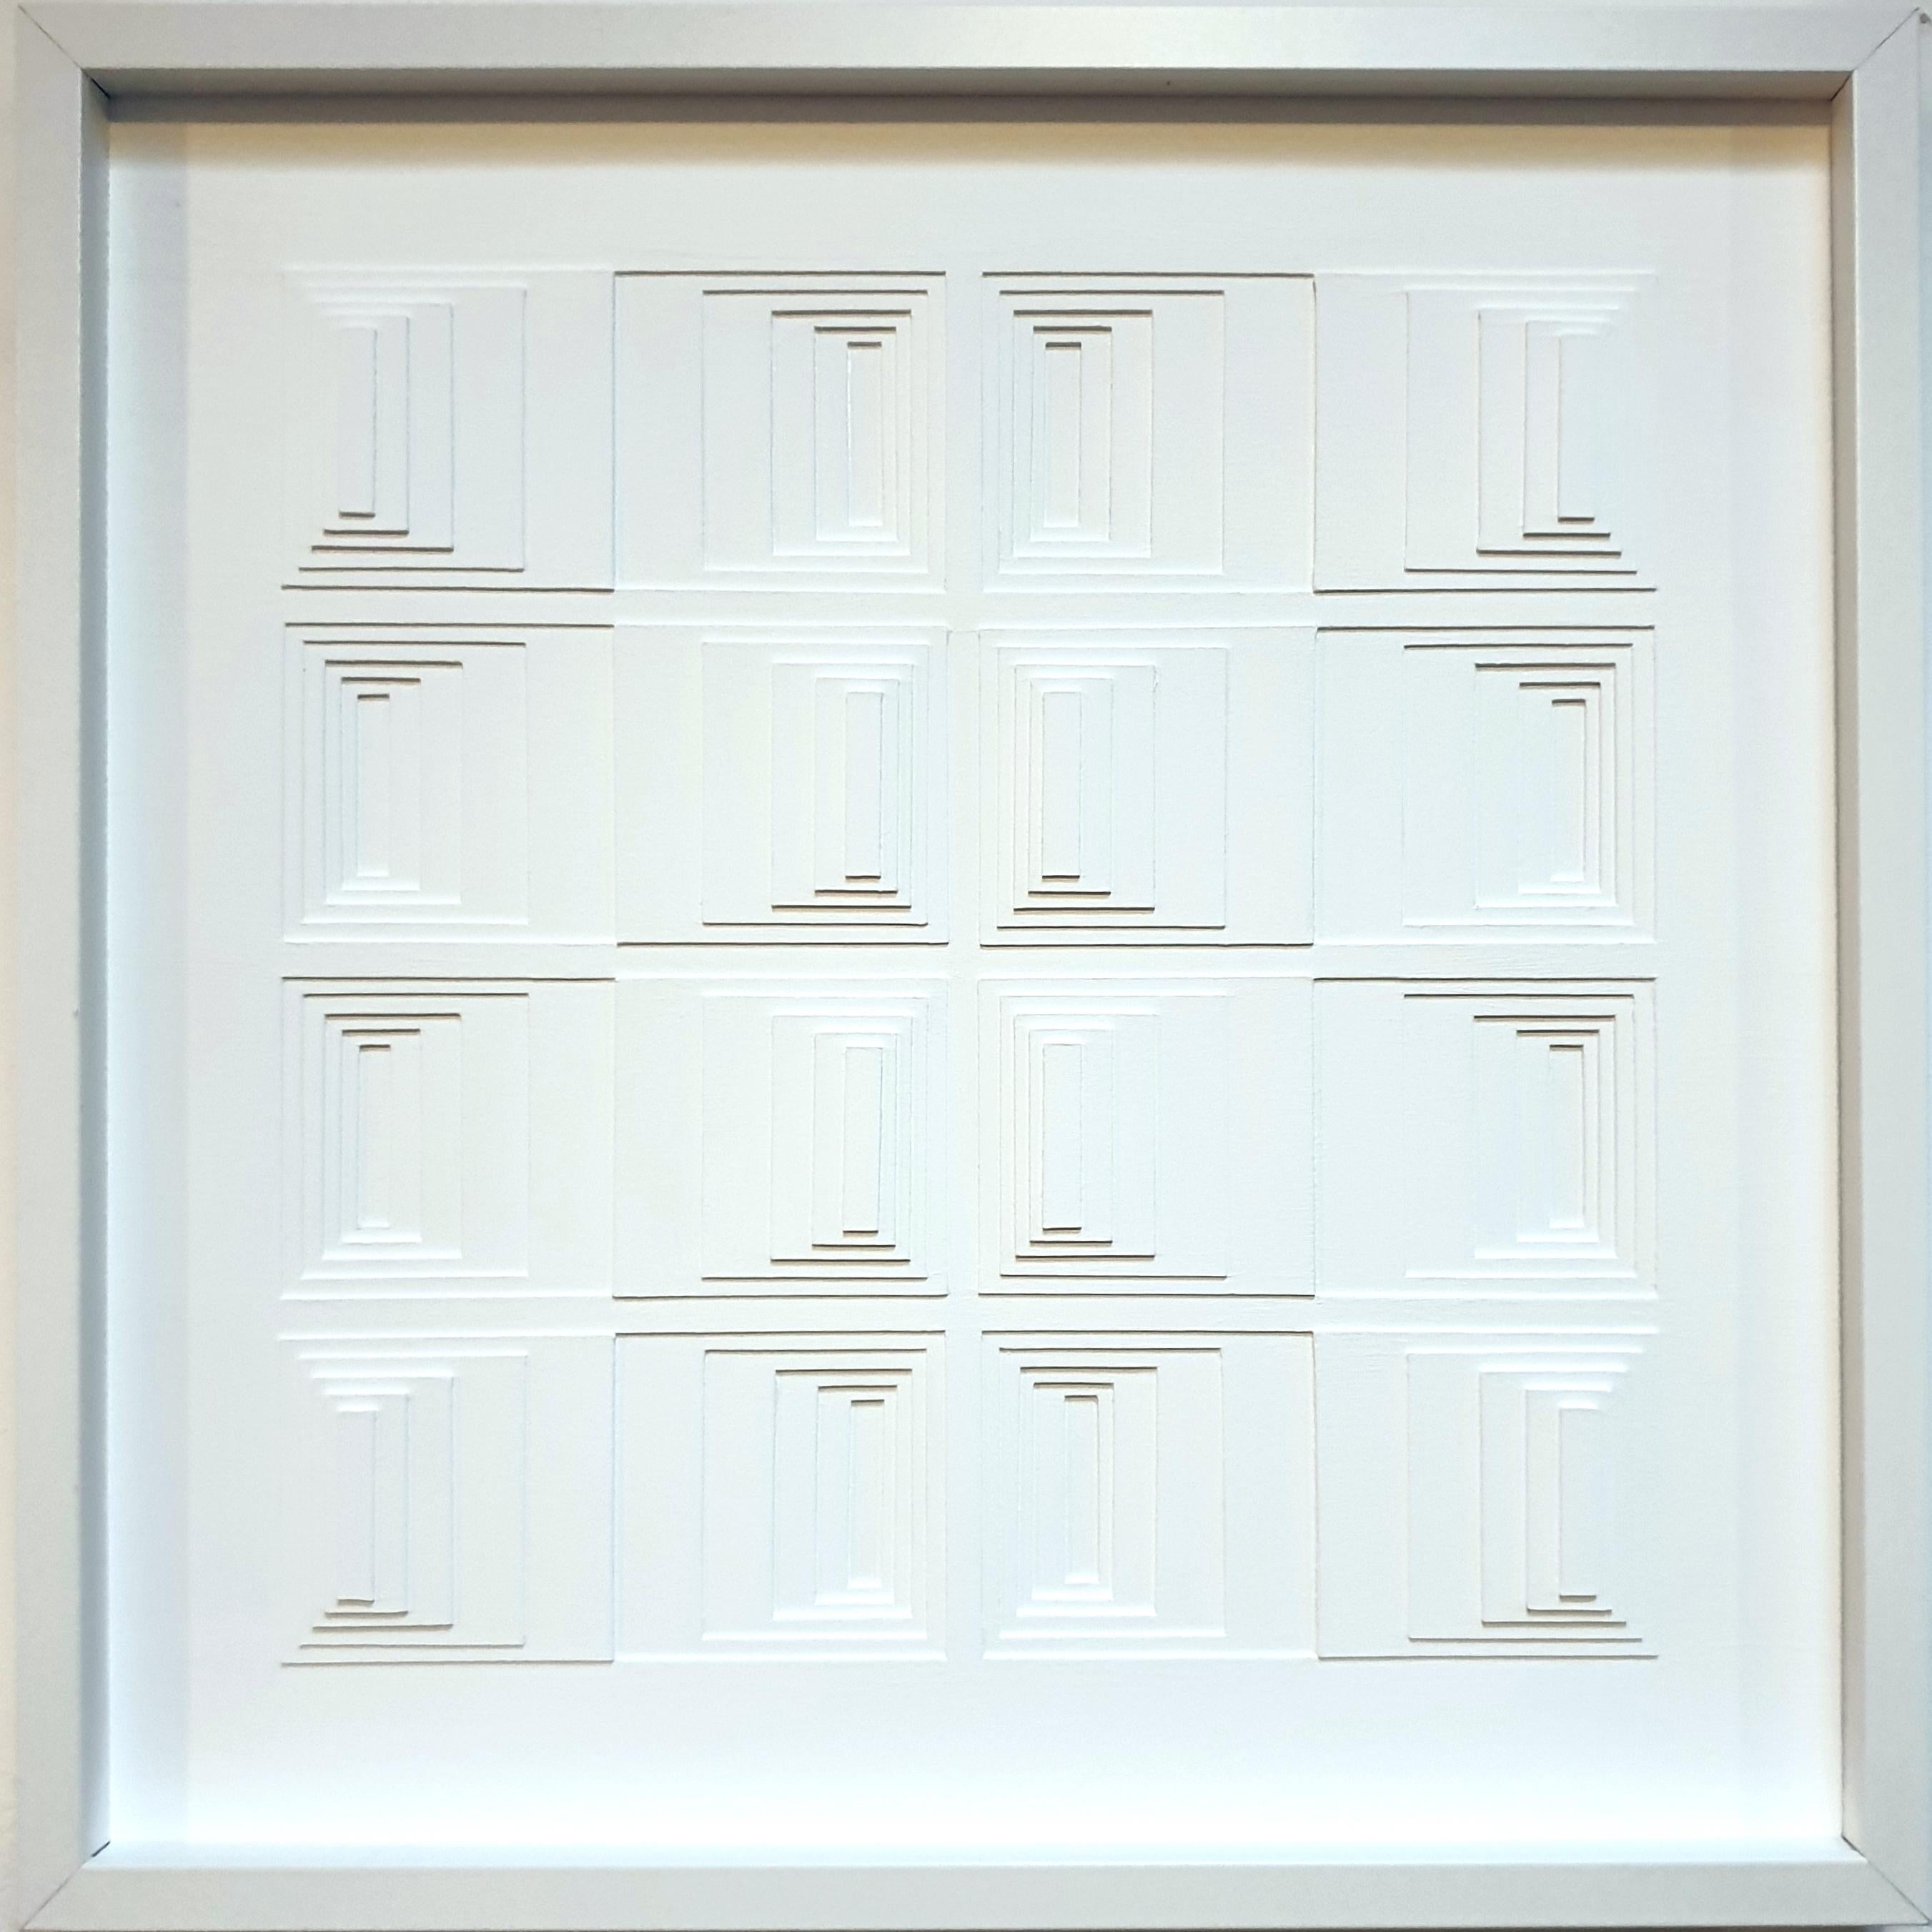 BB112019-721 - white contemporary modern abstract geometric painting relief